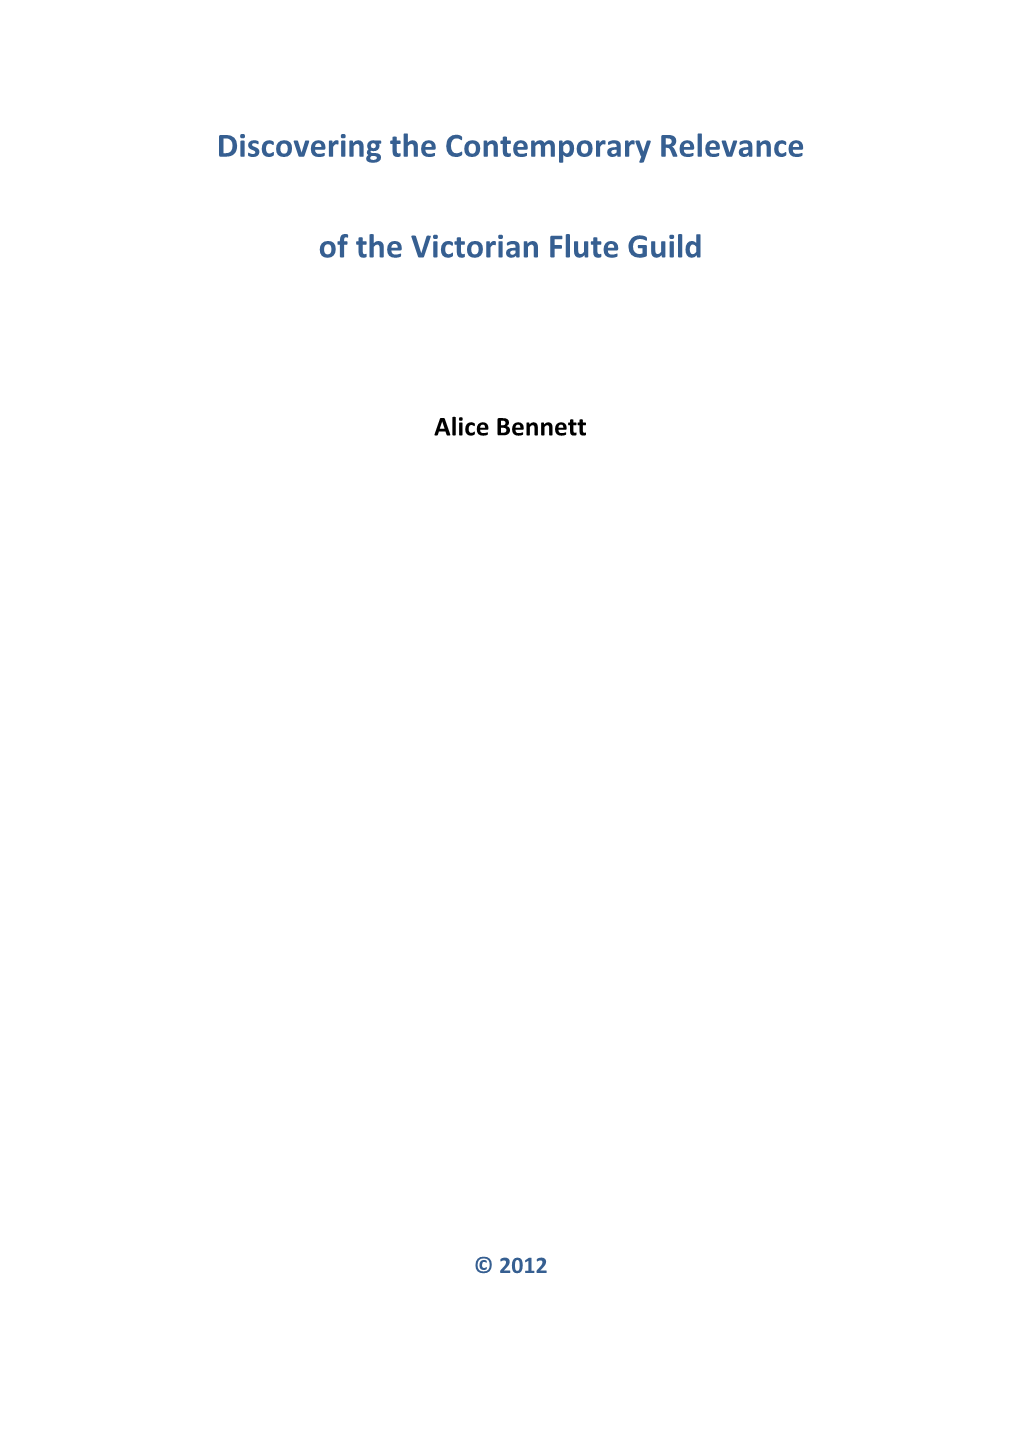 Discovering the Contemporary Relevance of the Victorian Flute Guild